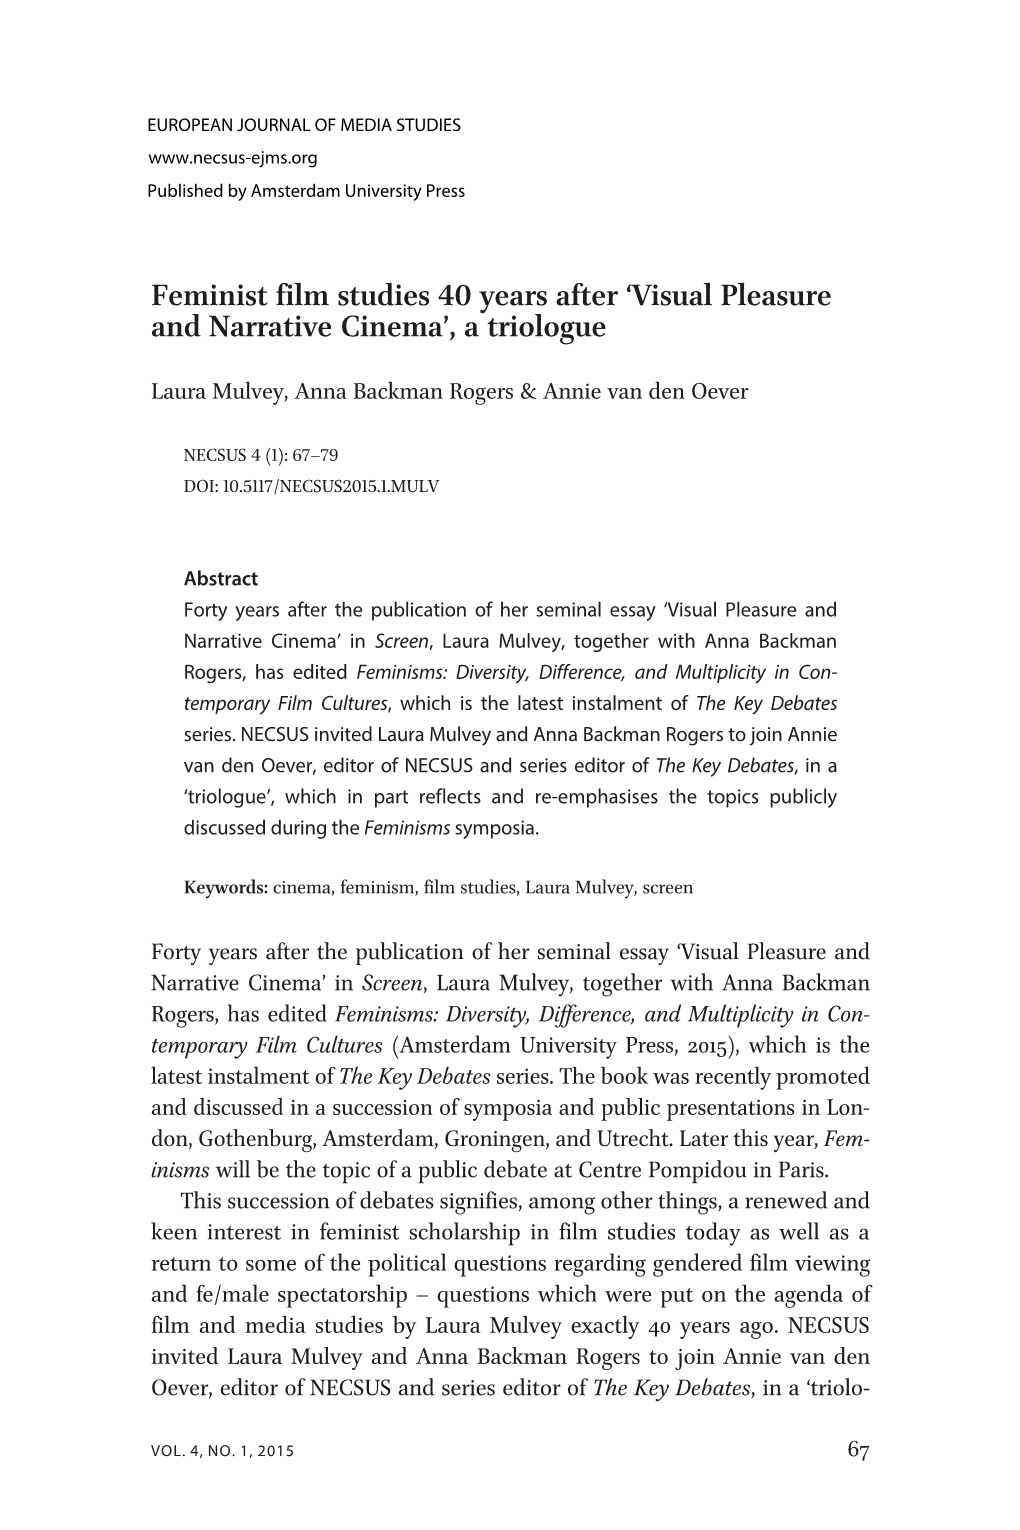 Feminist Film Studies 40 Years After VISUAL PLEASURE and NARRATIVE CINEMA, a Triologue